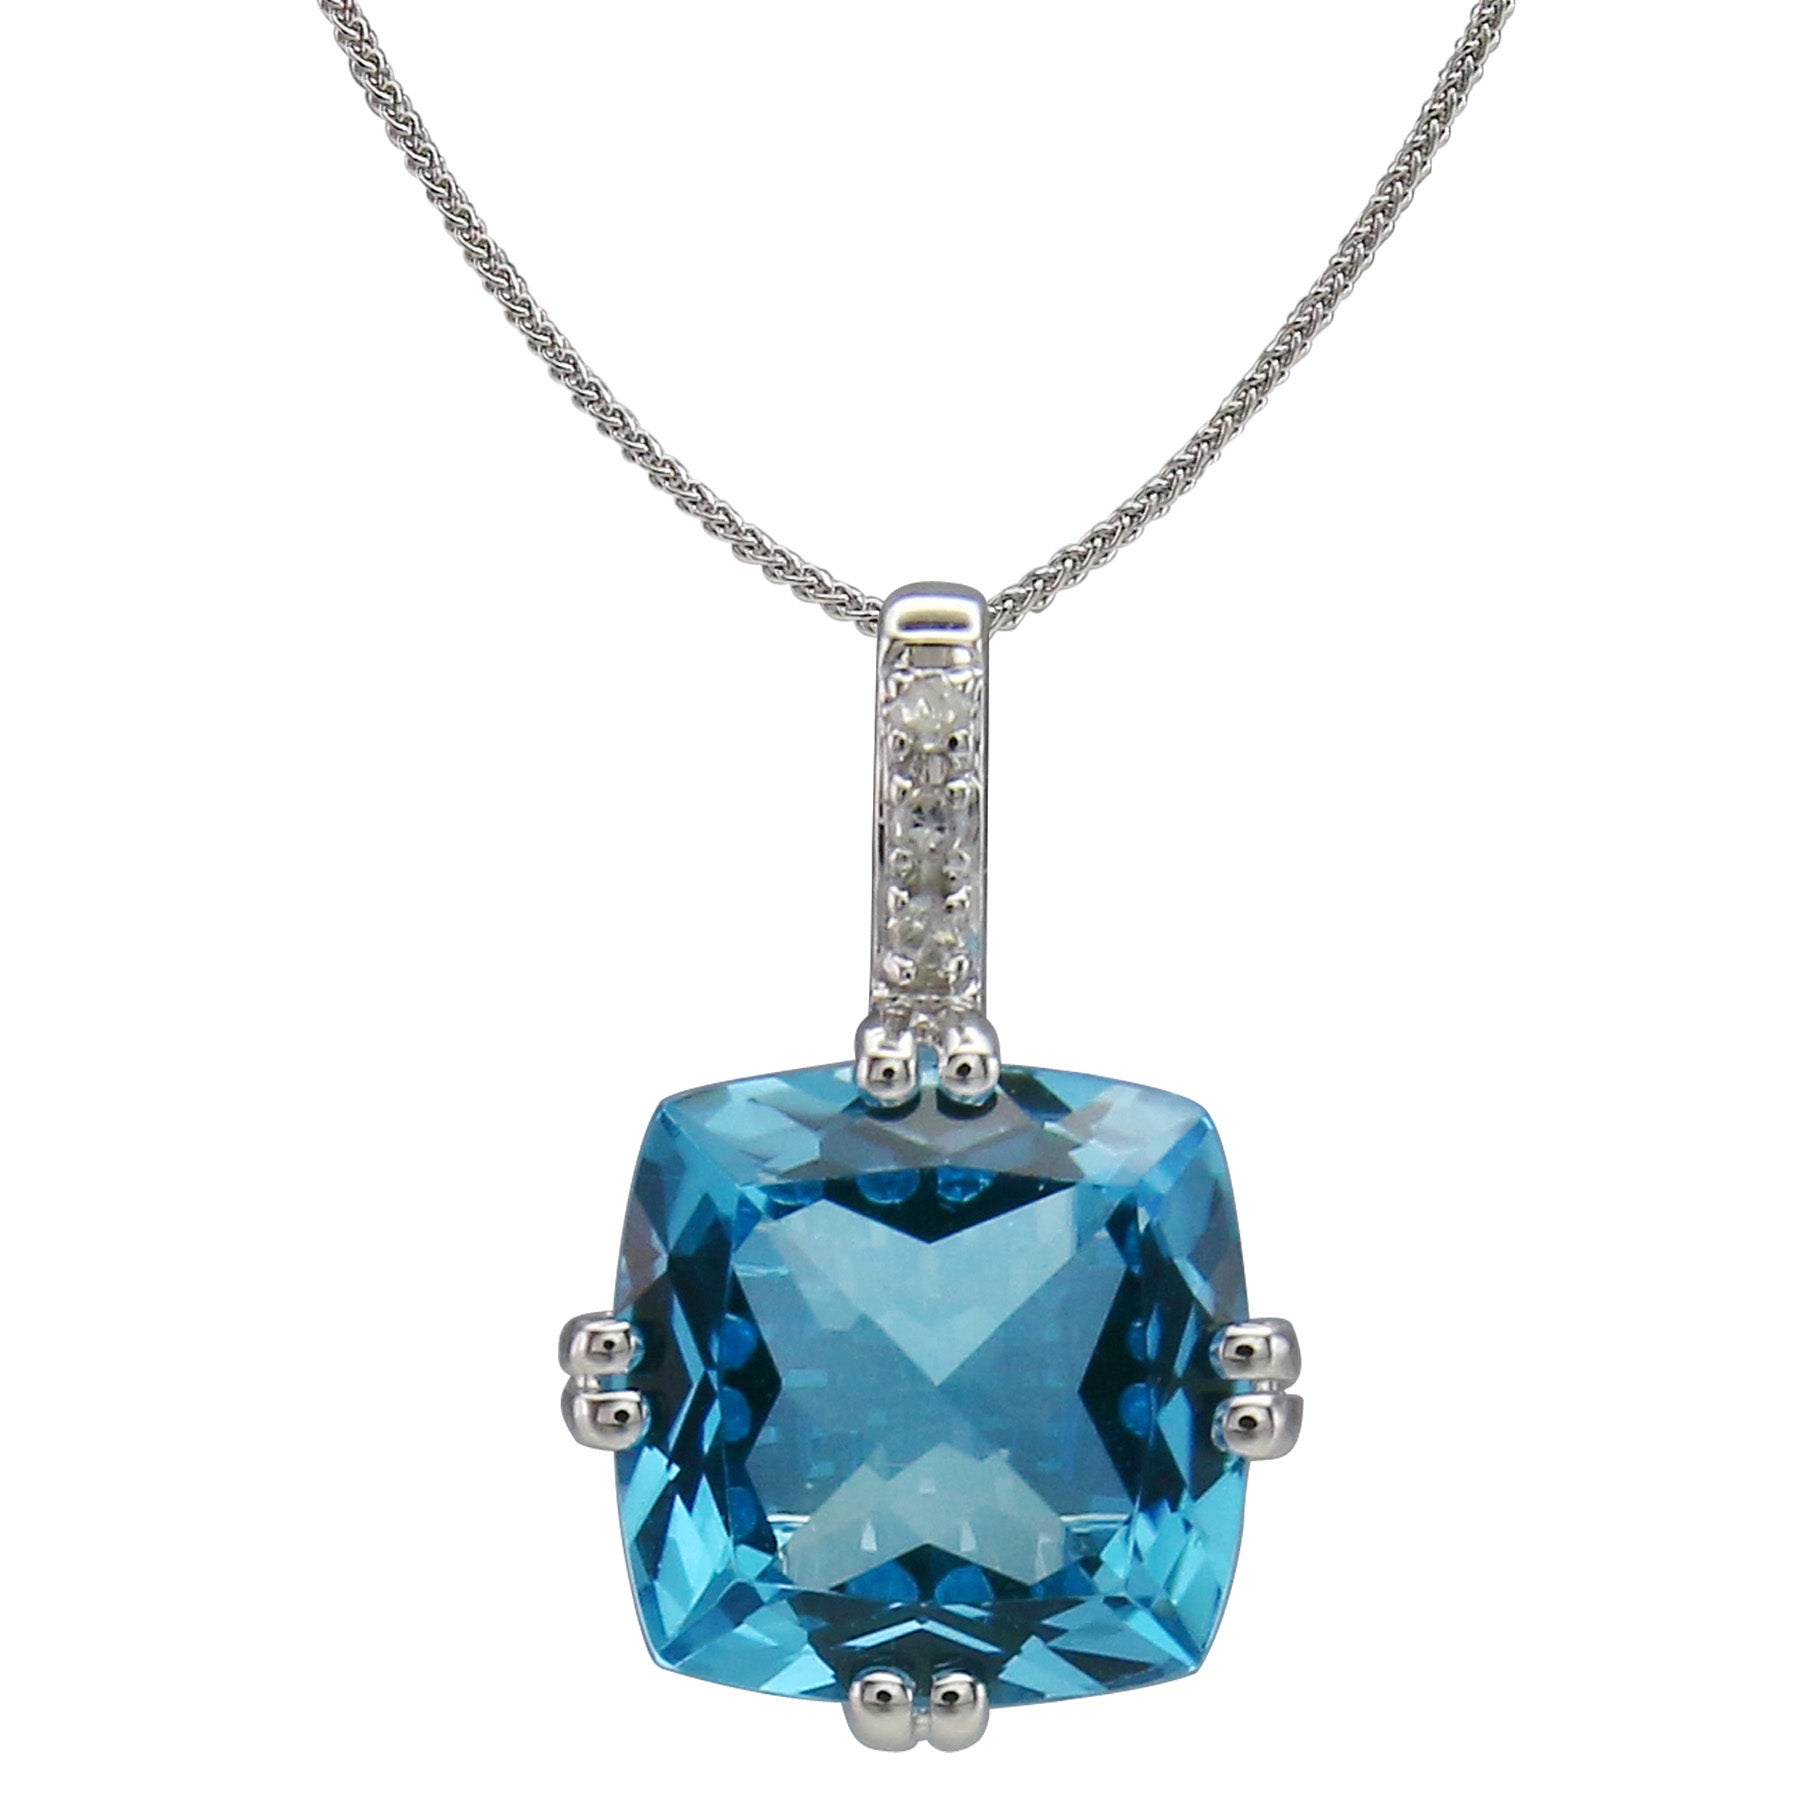 Diamond2Deal 14k White Gold 2.4ct Cushion Cut Blue and Diamond Pendant Necklace 18" for Women